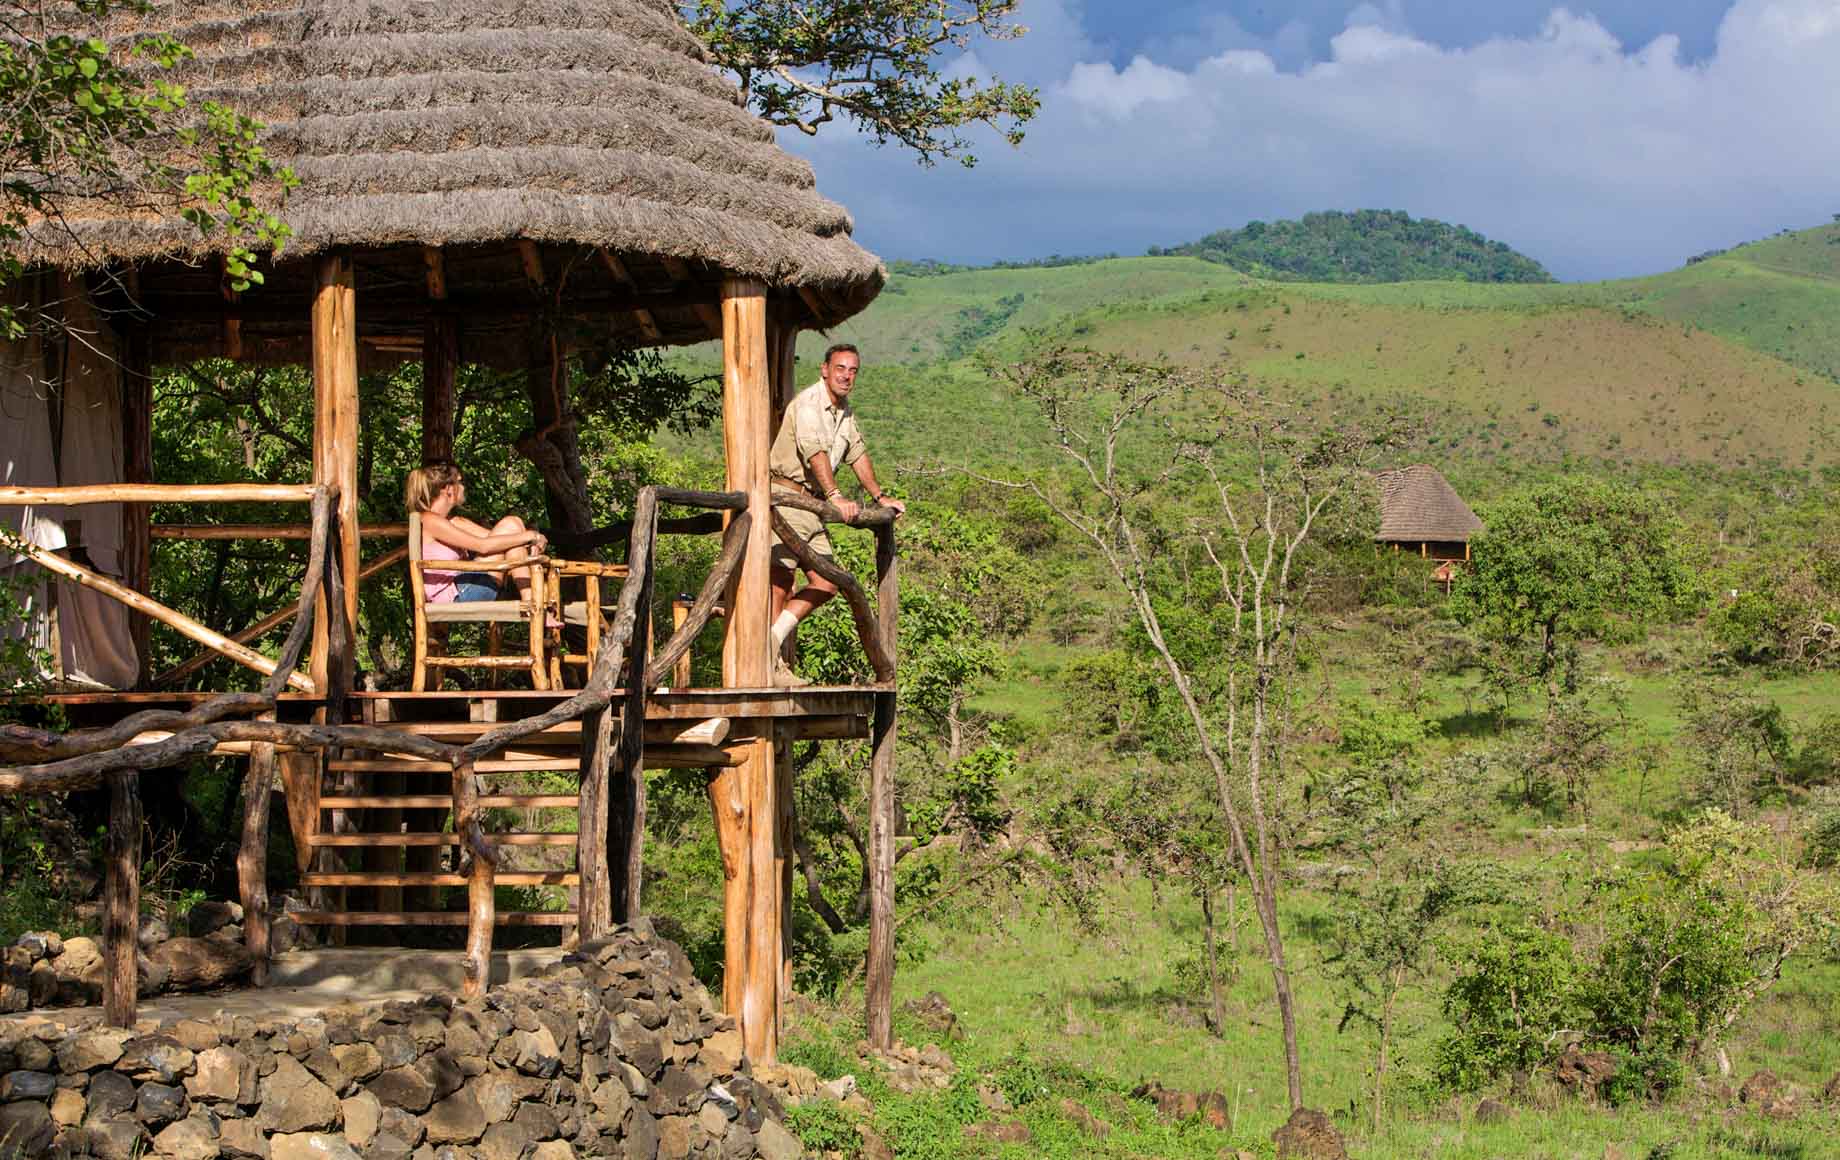 Looking out to a sunny, green day at the patio in Chyulu Hills in Africa